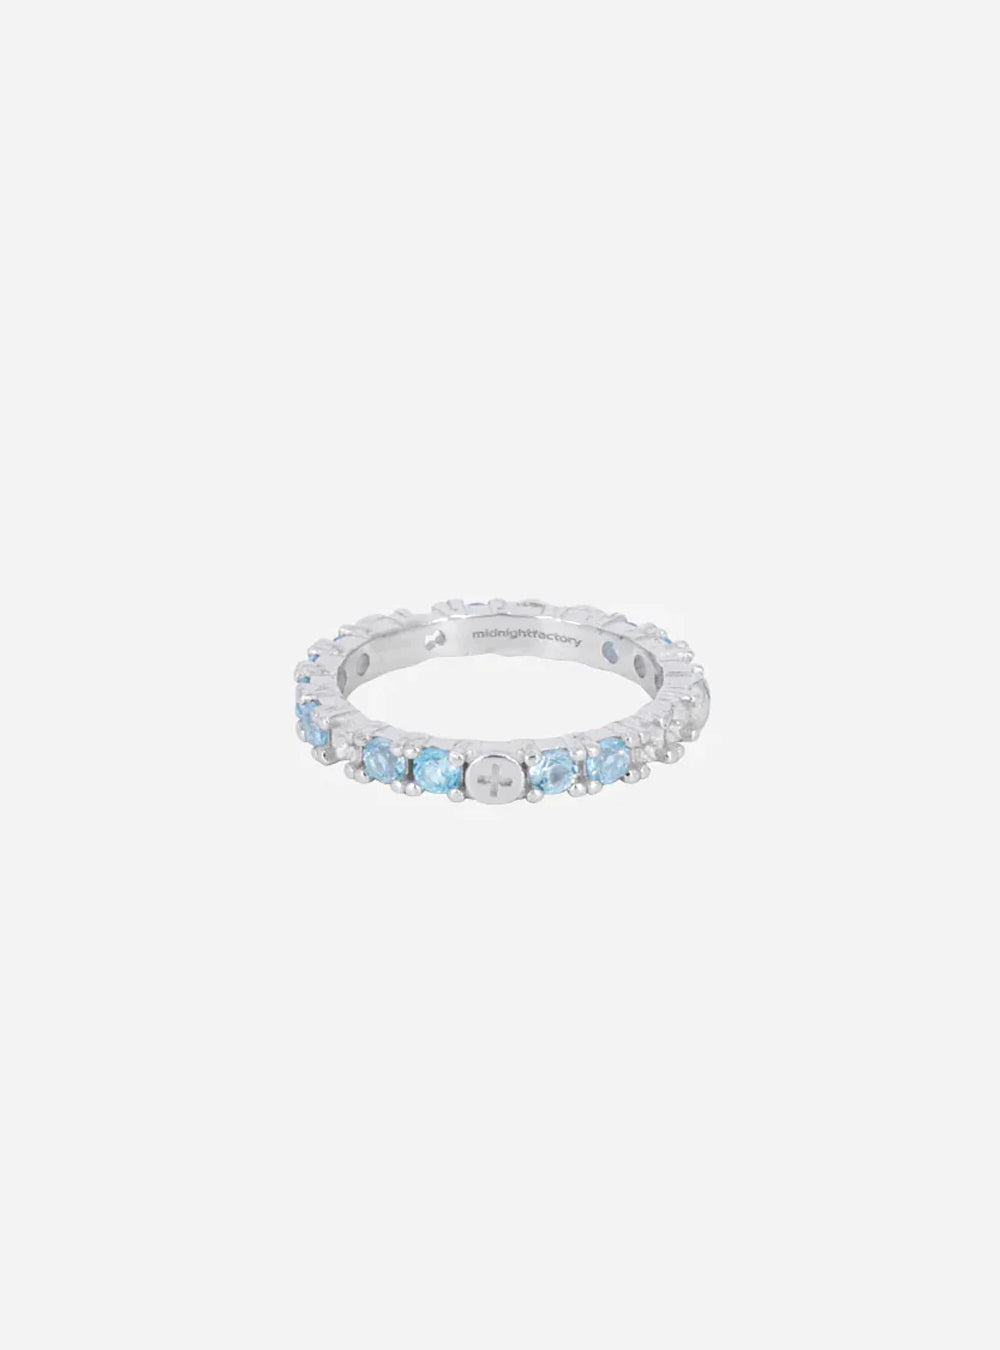 a MIDNIGHTFACTORY white gold ring with blue topaz and diamonds.